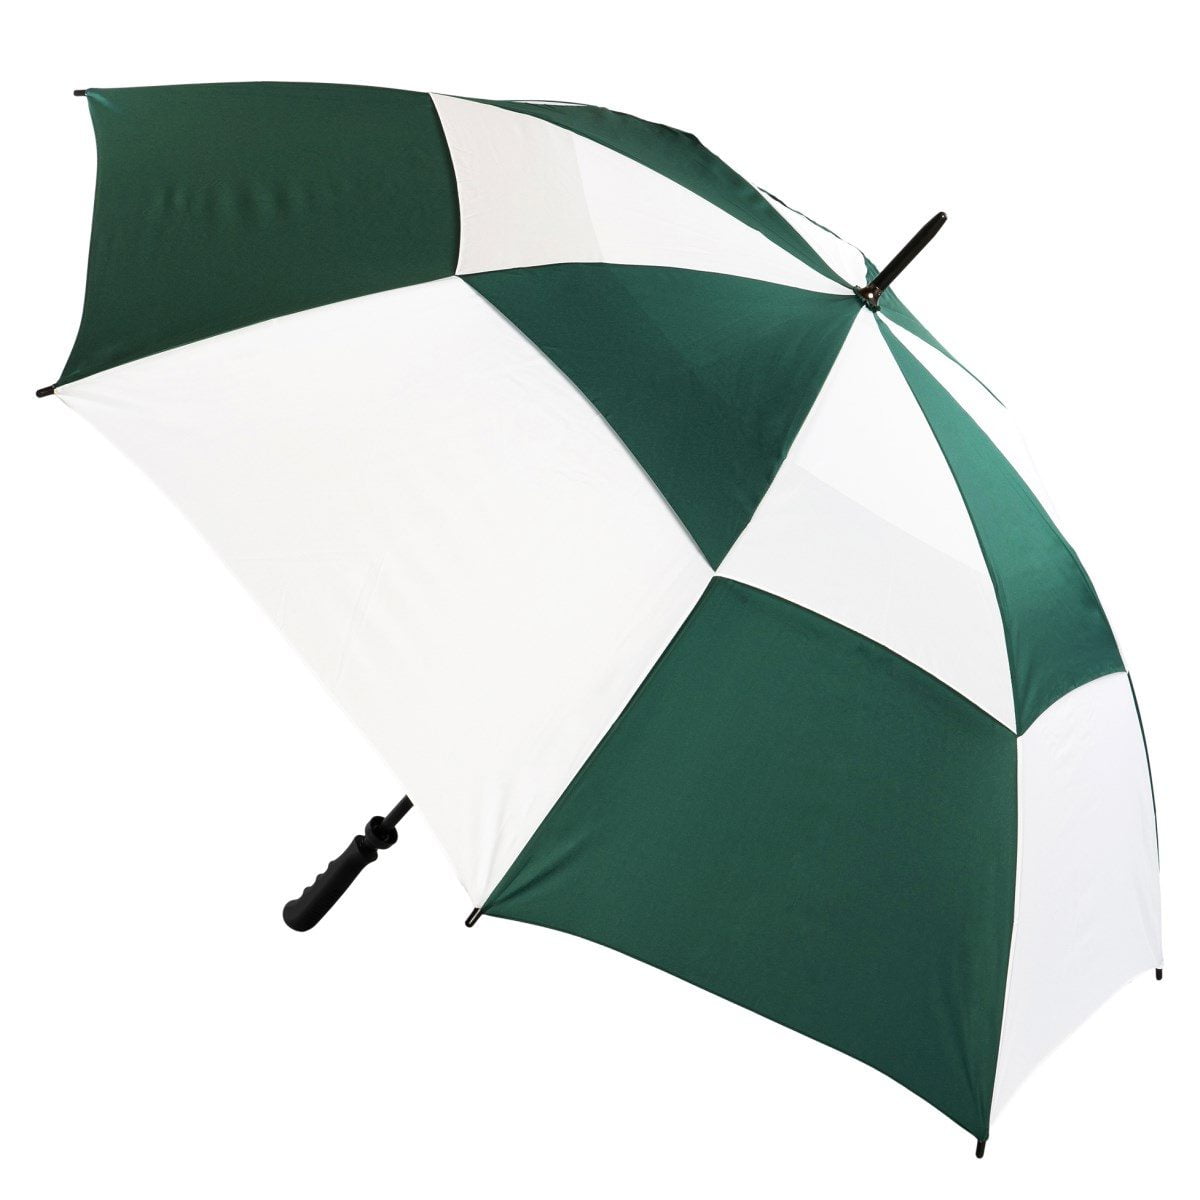 Green & white vented golf umbrella, completely windproof